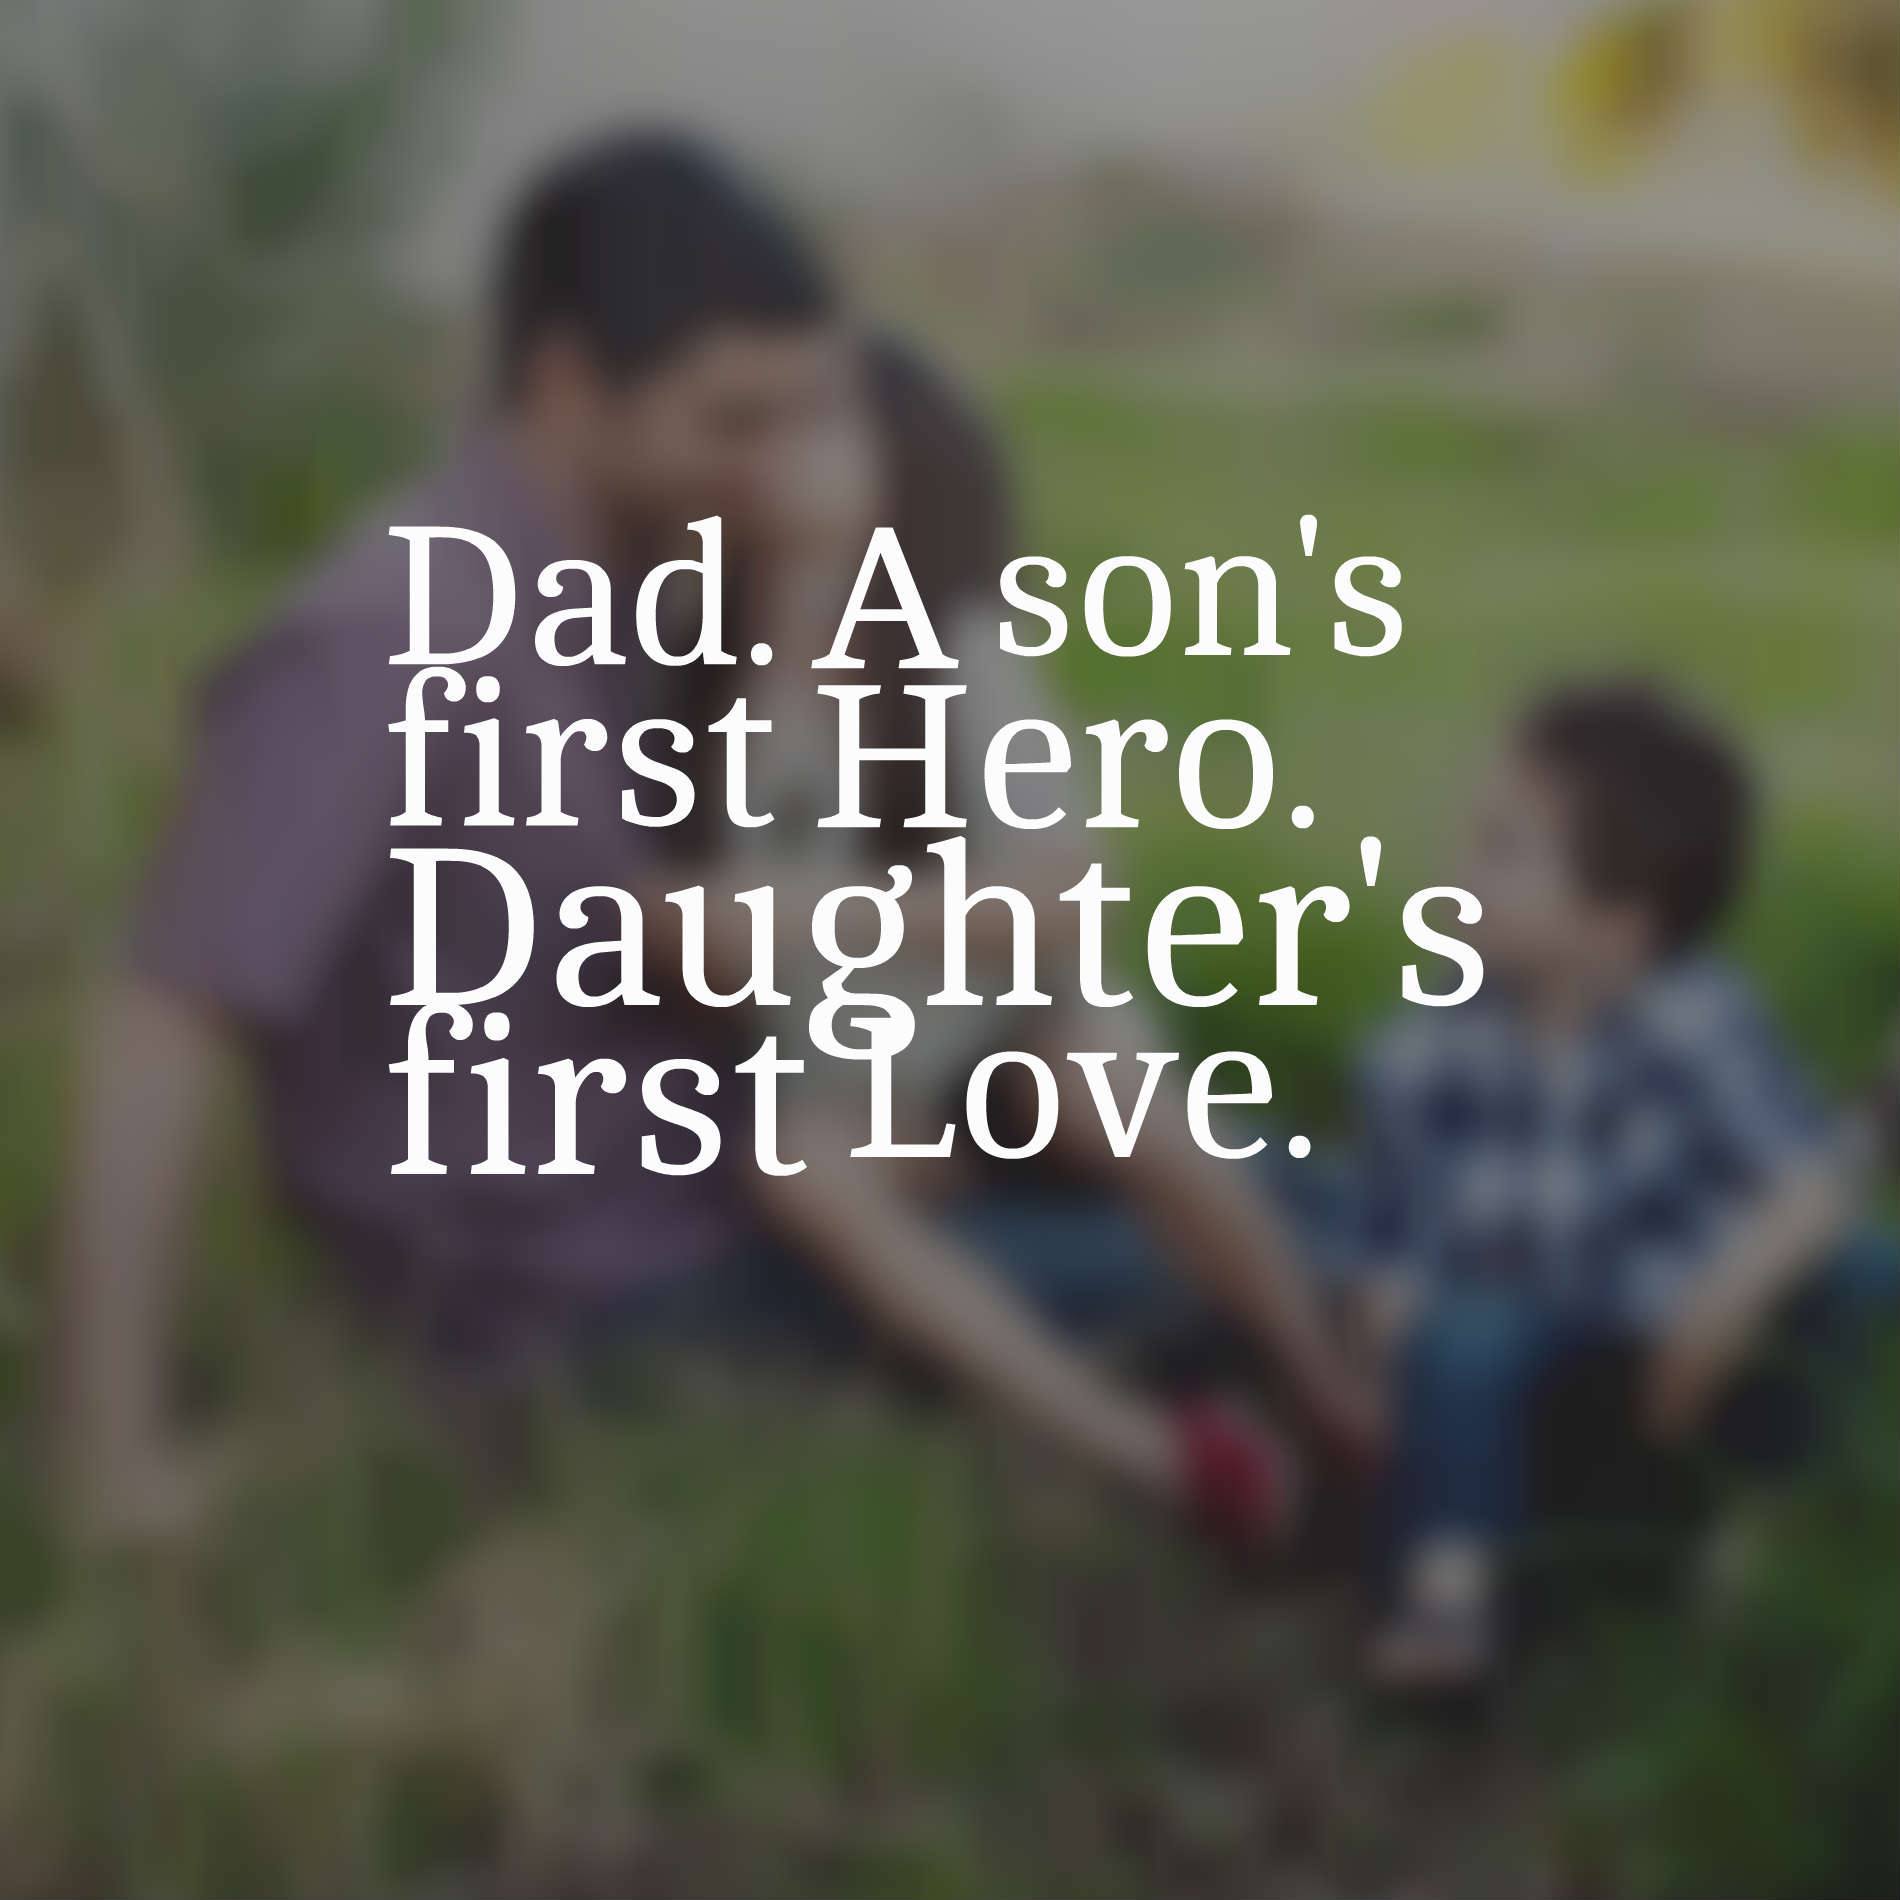 Dad. A son's first Hero. Daughter's first Love.